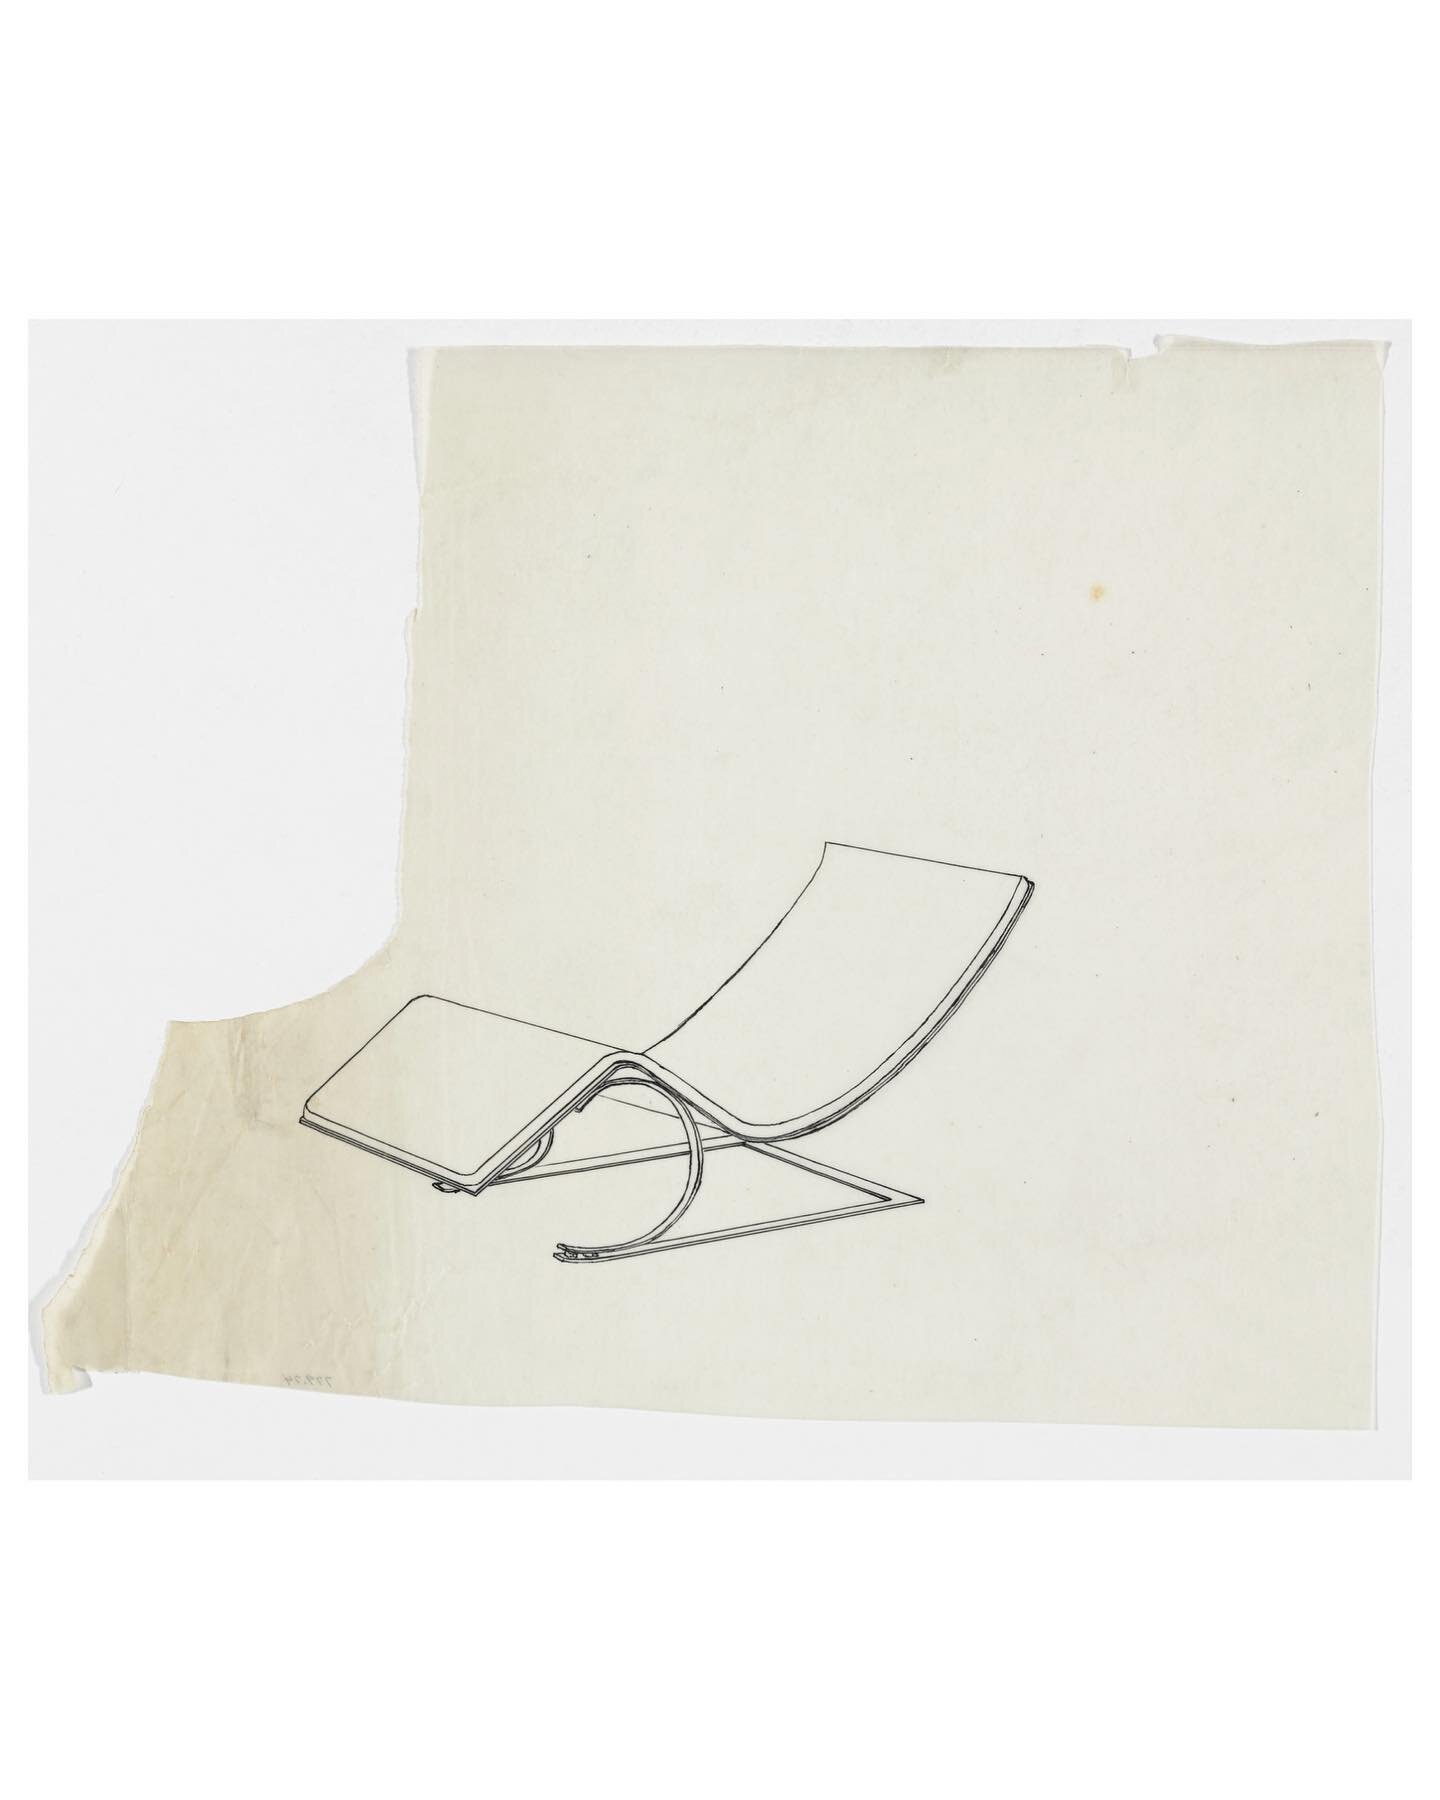 Artistic Reference: Ludwig Mies van der Rohe (1886-1969), Reclining Chair without Arms (Perspective sketch),
c.1931

An ink sketch by Mies, which illustrate harmonious between form and function. Alongside his architecture, Van Der Rohe created unclut